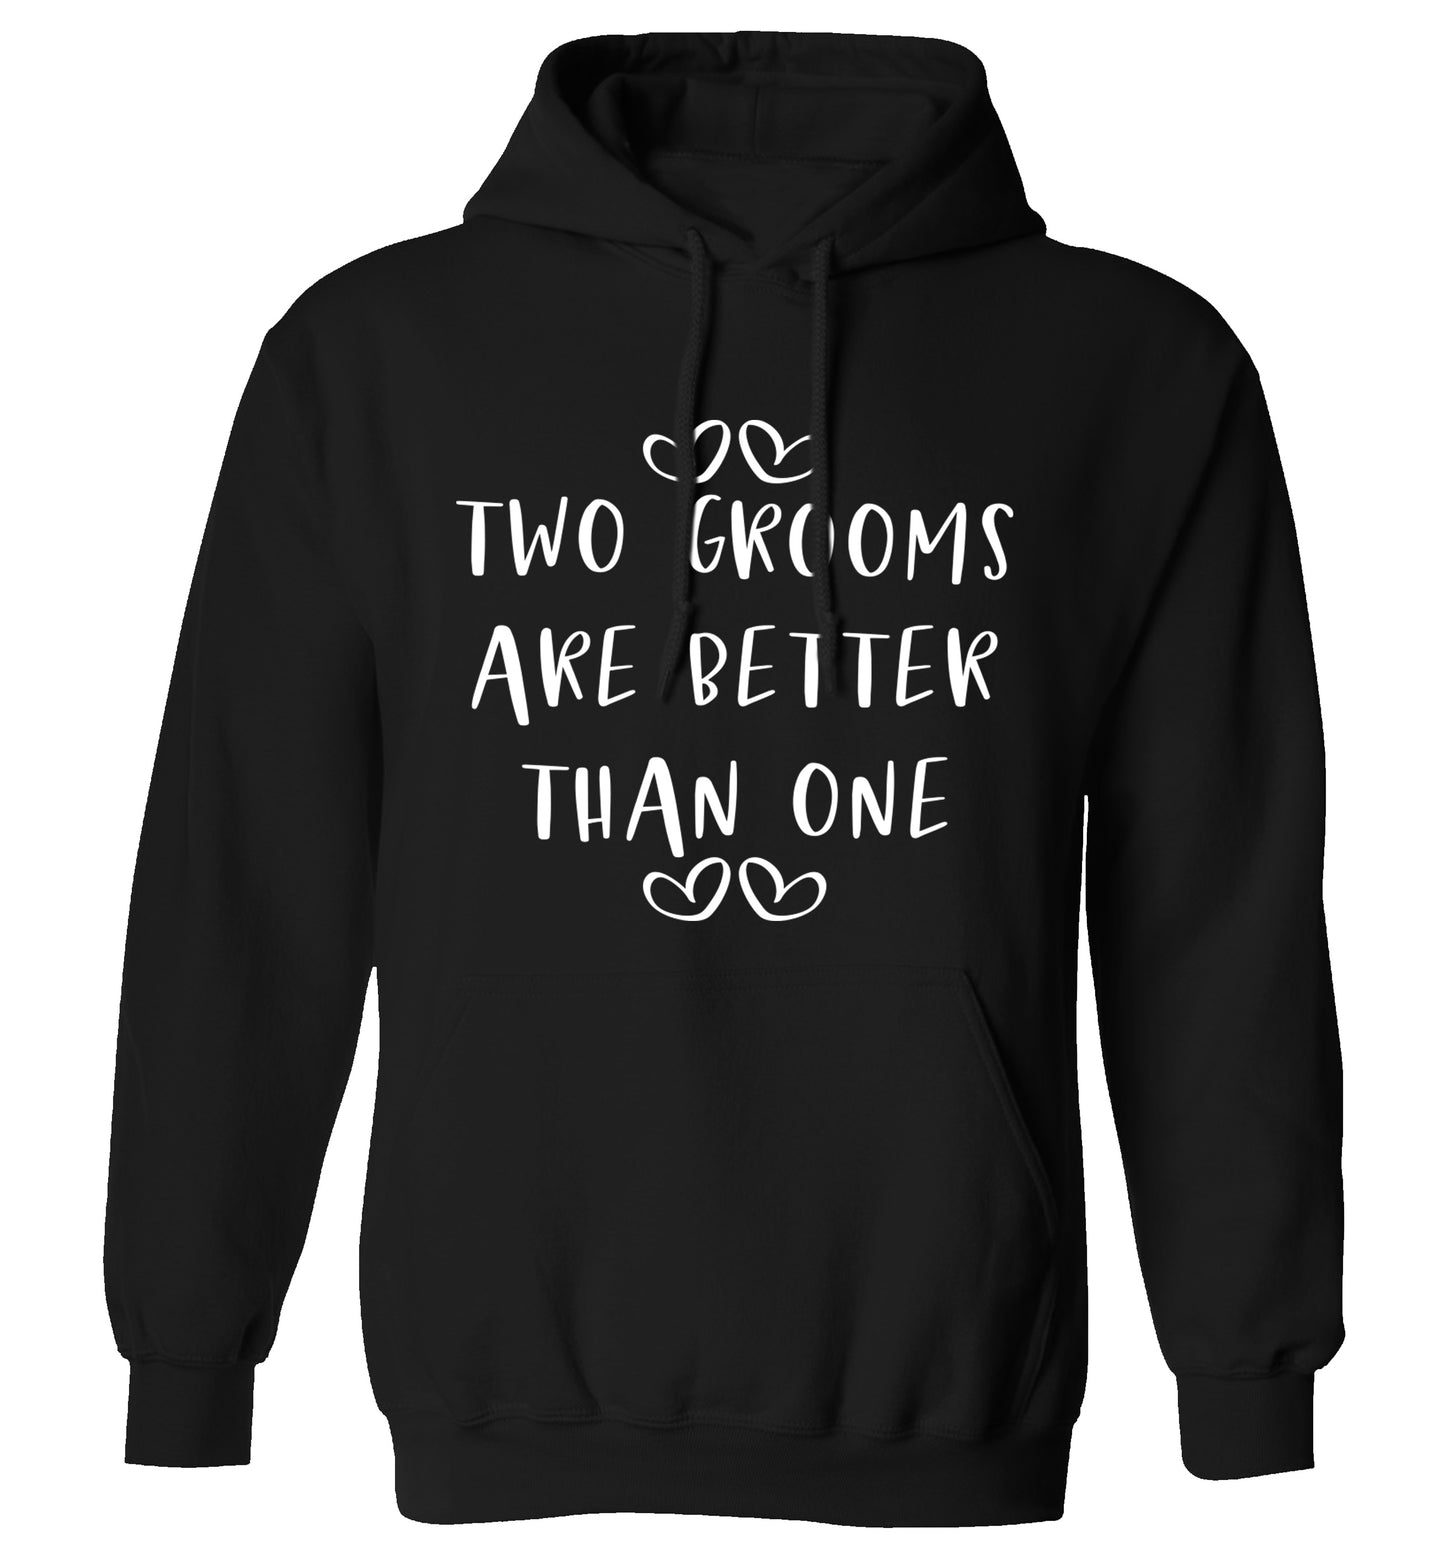 Two grooms are better than one adults unisex black hoodie 2XL